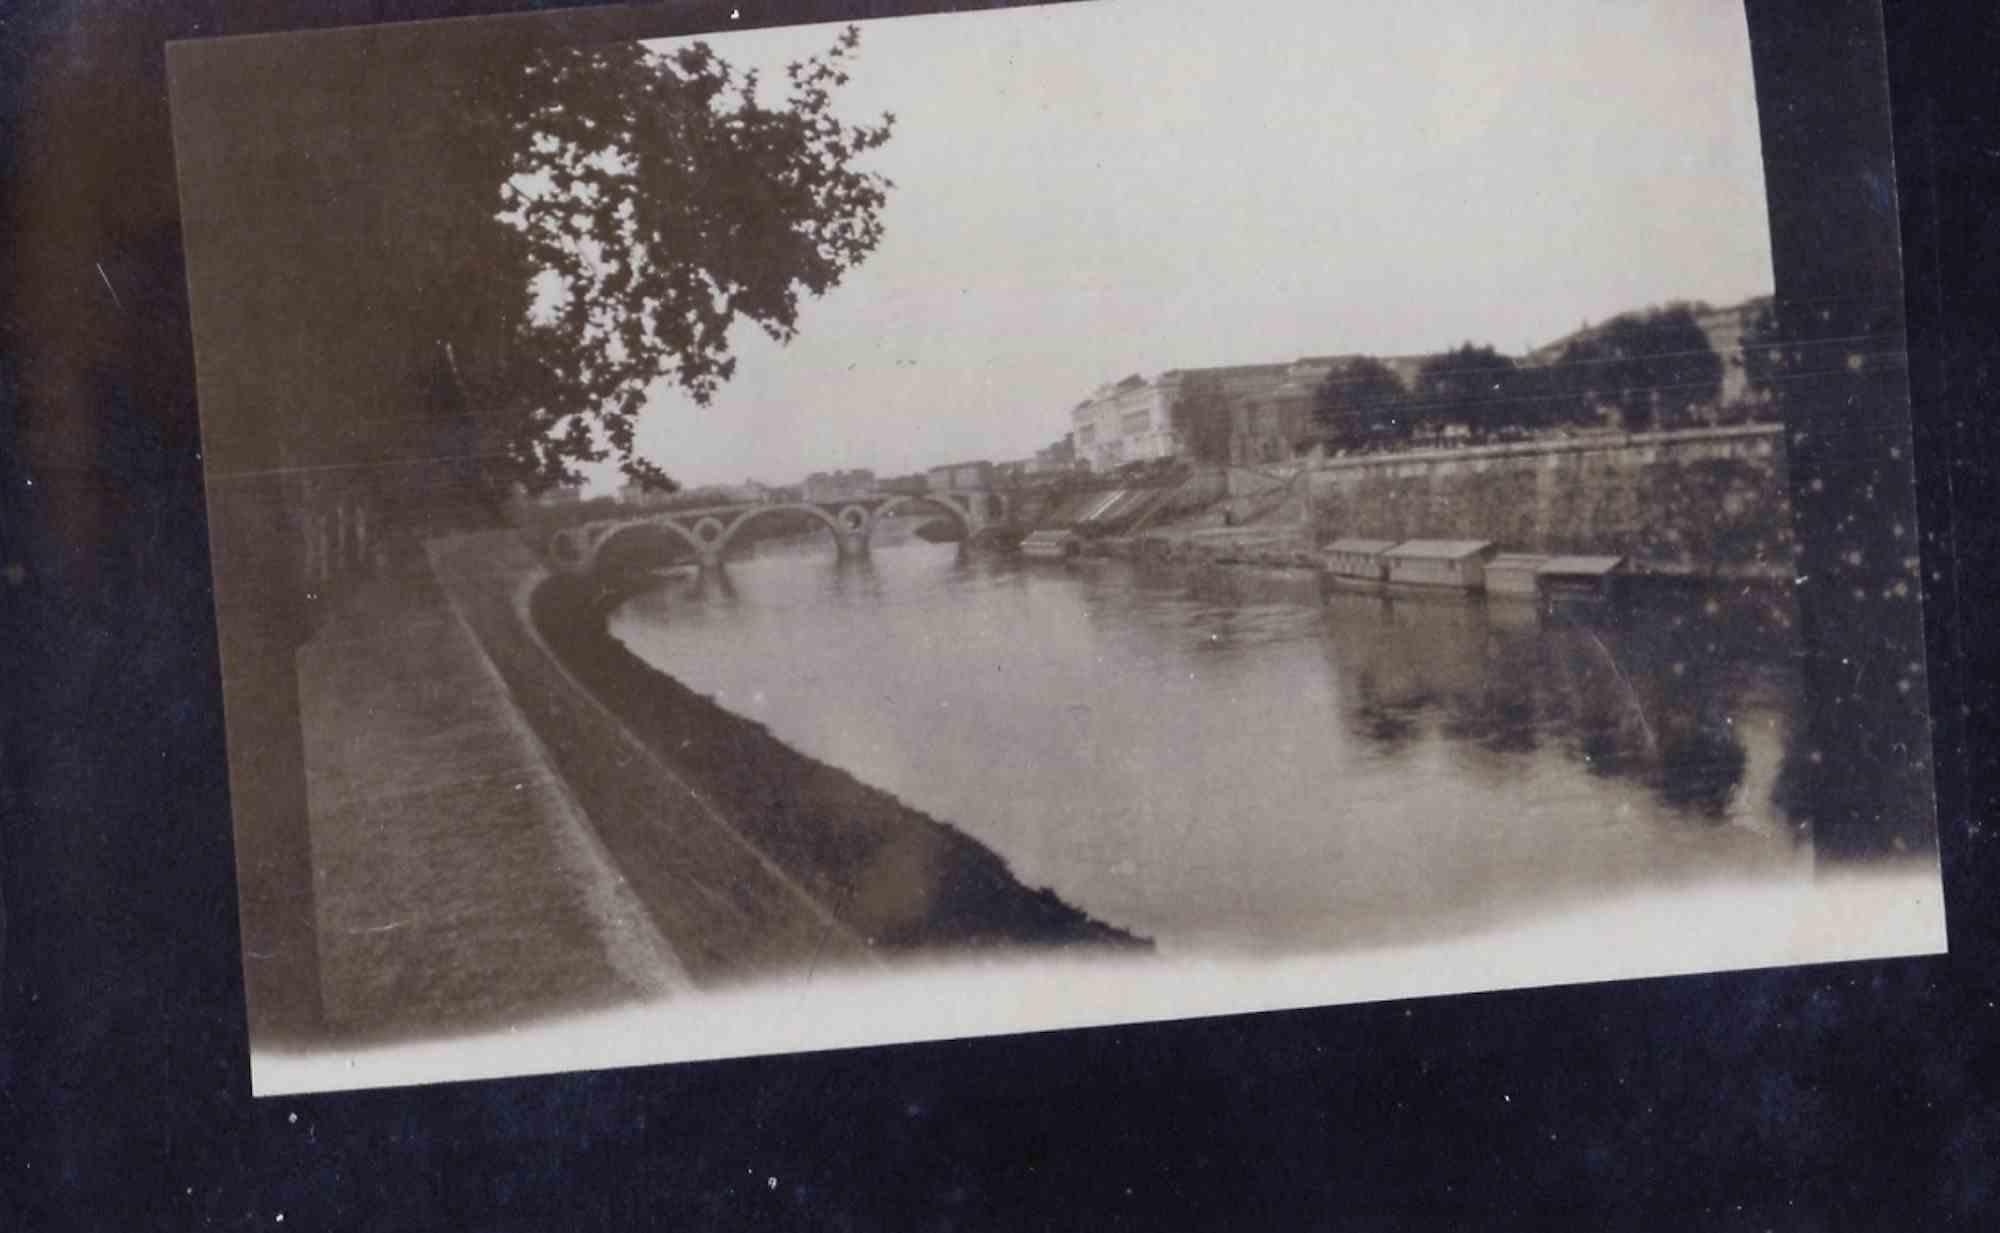 Unknown Figurative Photograph - Old Days Photo - Along the Tiber - Vintage Photo - Mid-20th Century